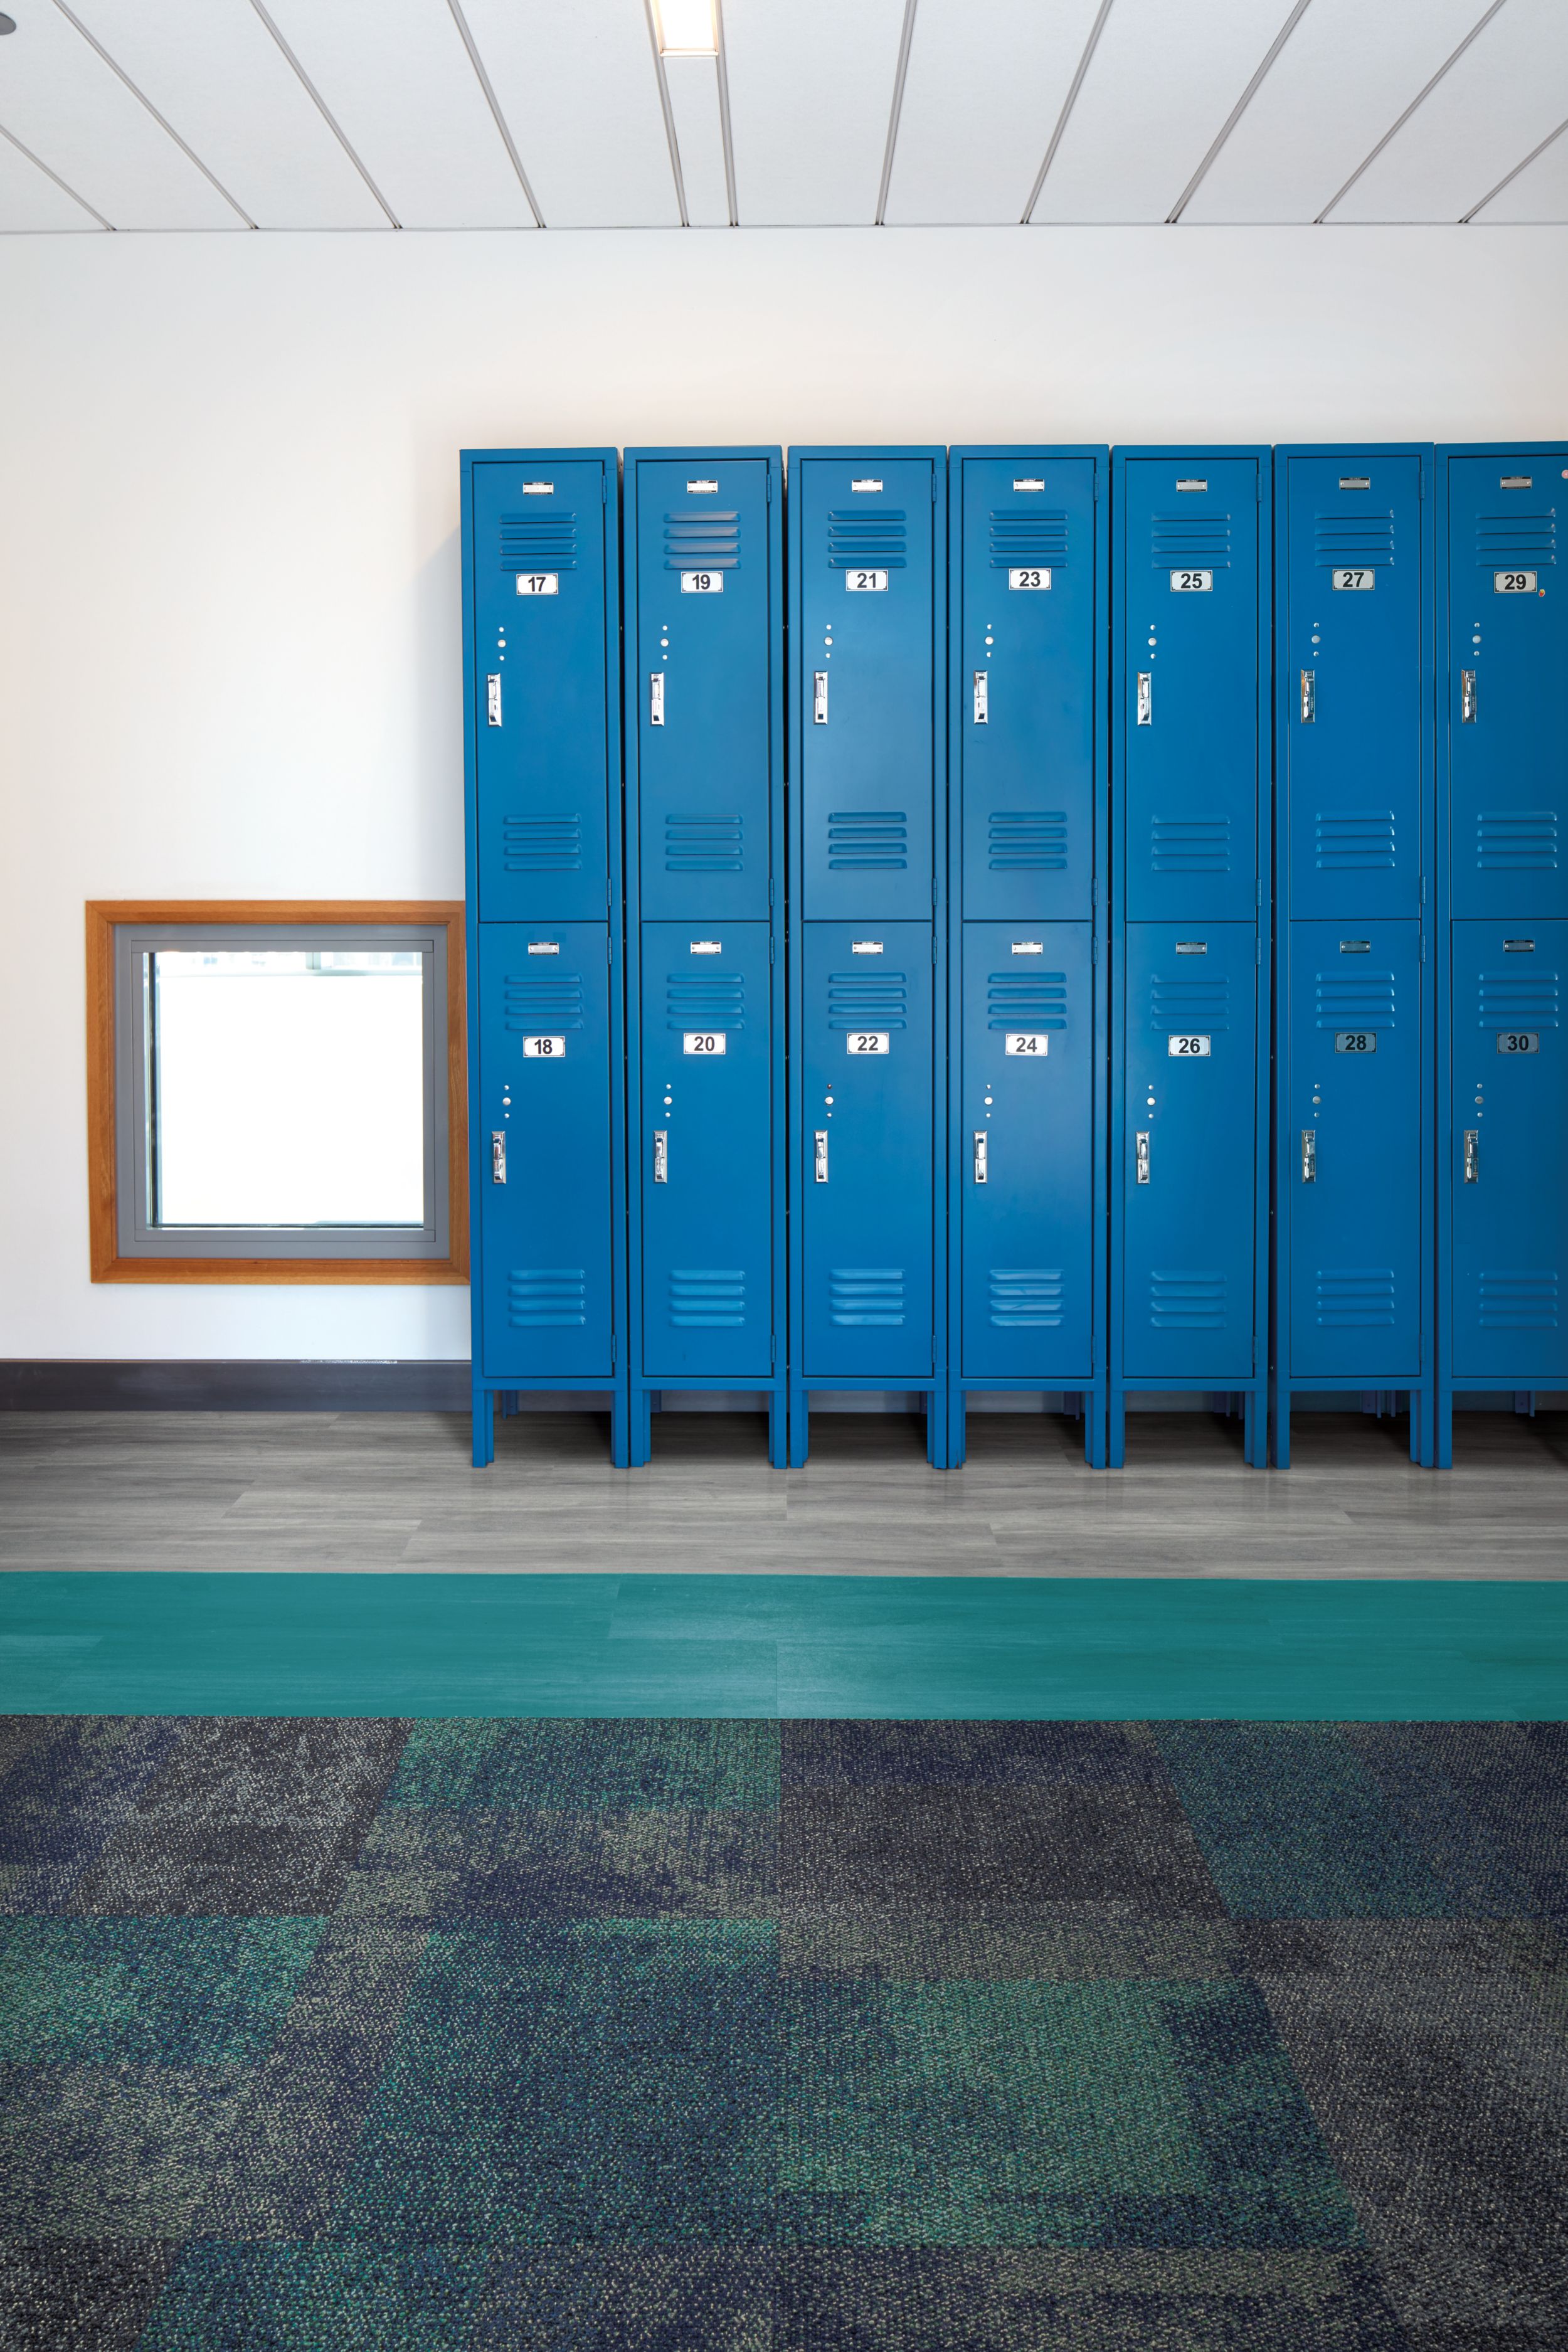 Interface Exposed carpet tile and Studio Set LVT in hallway with blue lockers imagen número 8